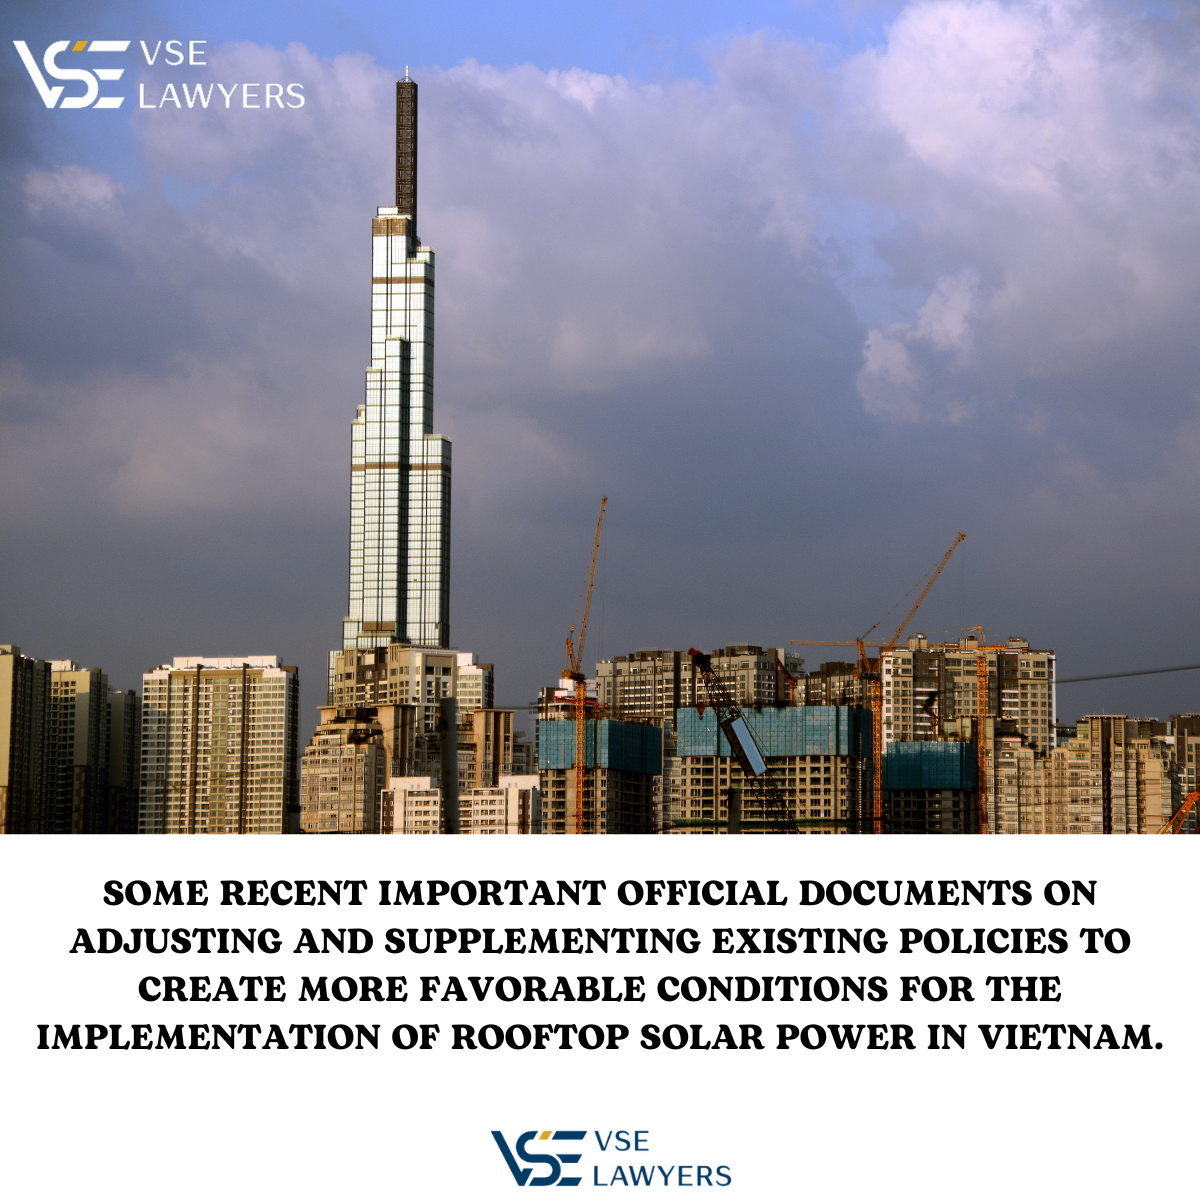 SOME RECENT IMPORTANT OFFICIAL DOCUMENTS ON ADJUSTING AND SUPPLEMENTING EXISTING POLICIES TO CREATE MORE FAVORABLE CONDITIONS FOR THE IMPLEMENTATION OF ROOFTOP SOLAR POWER IN VIETNAM.